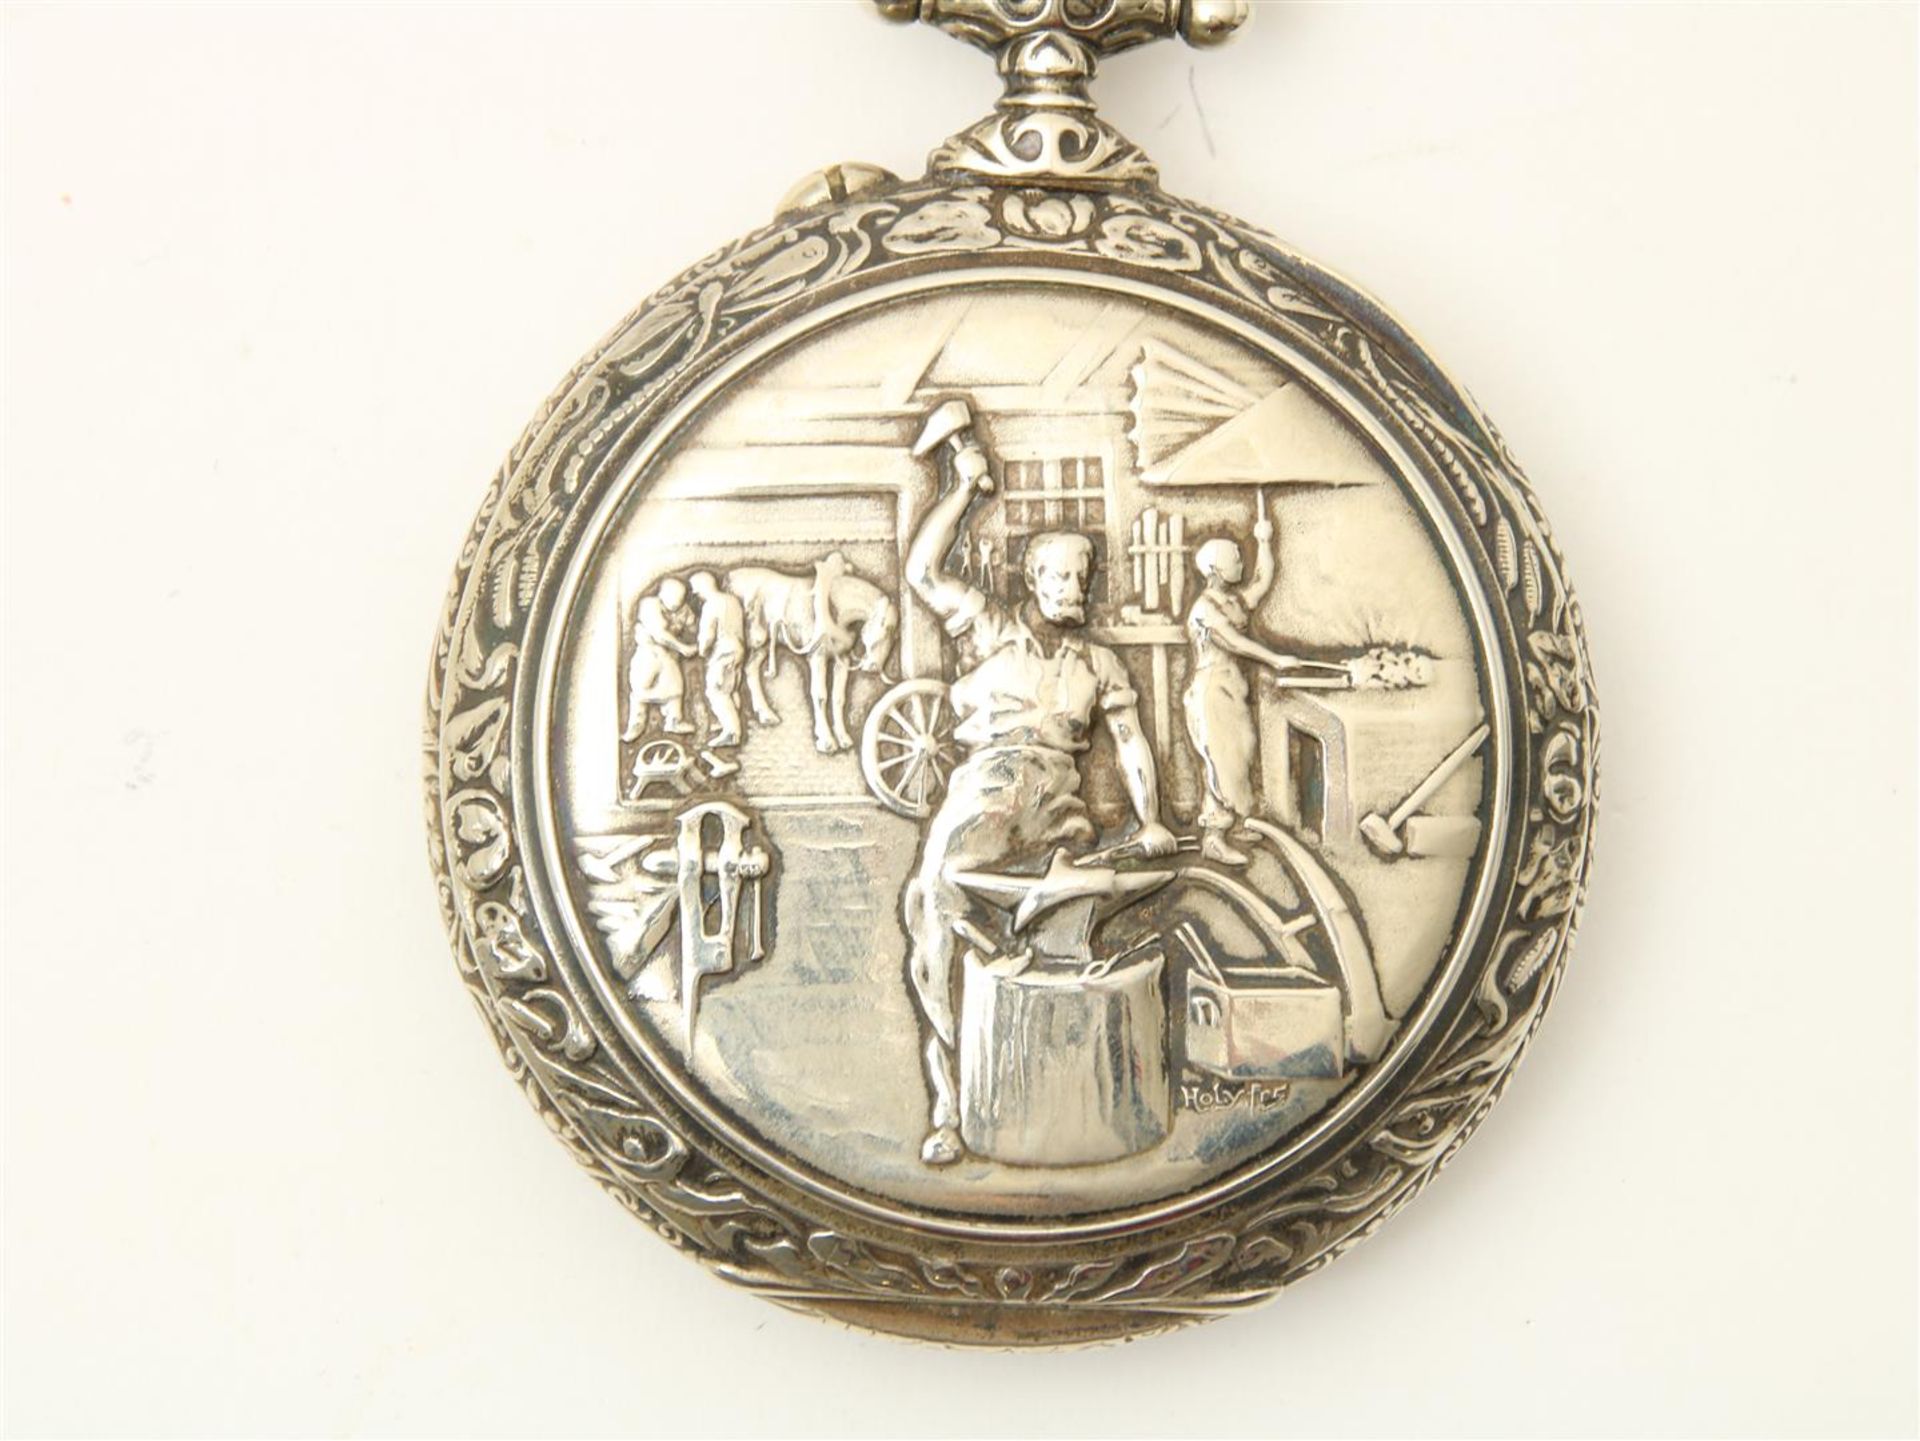 Silver pocket watch, with a lid with forge on the back, address: Doxa, Liege 1905, engraved on the - Image 2 of 4